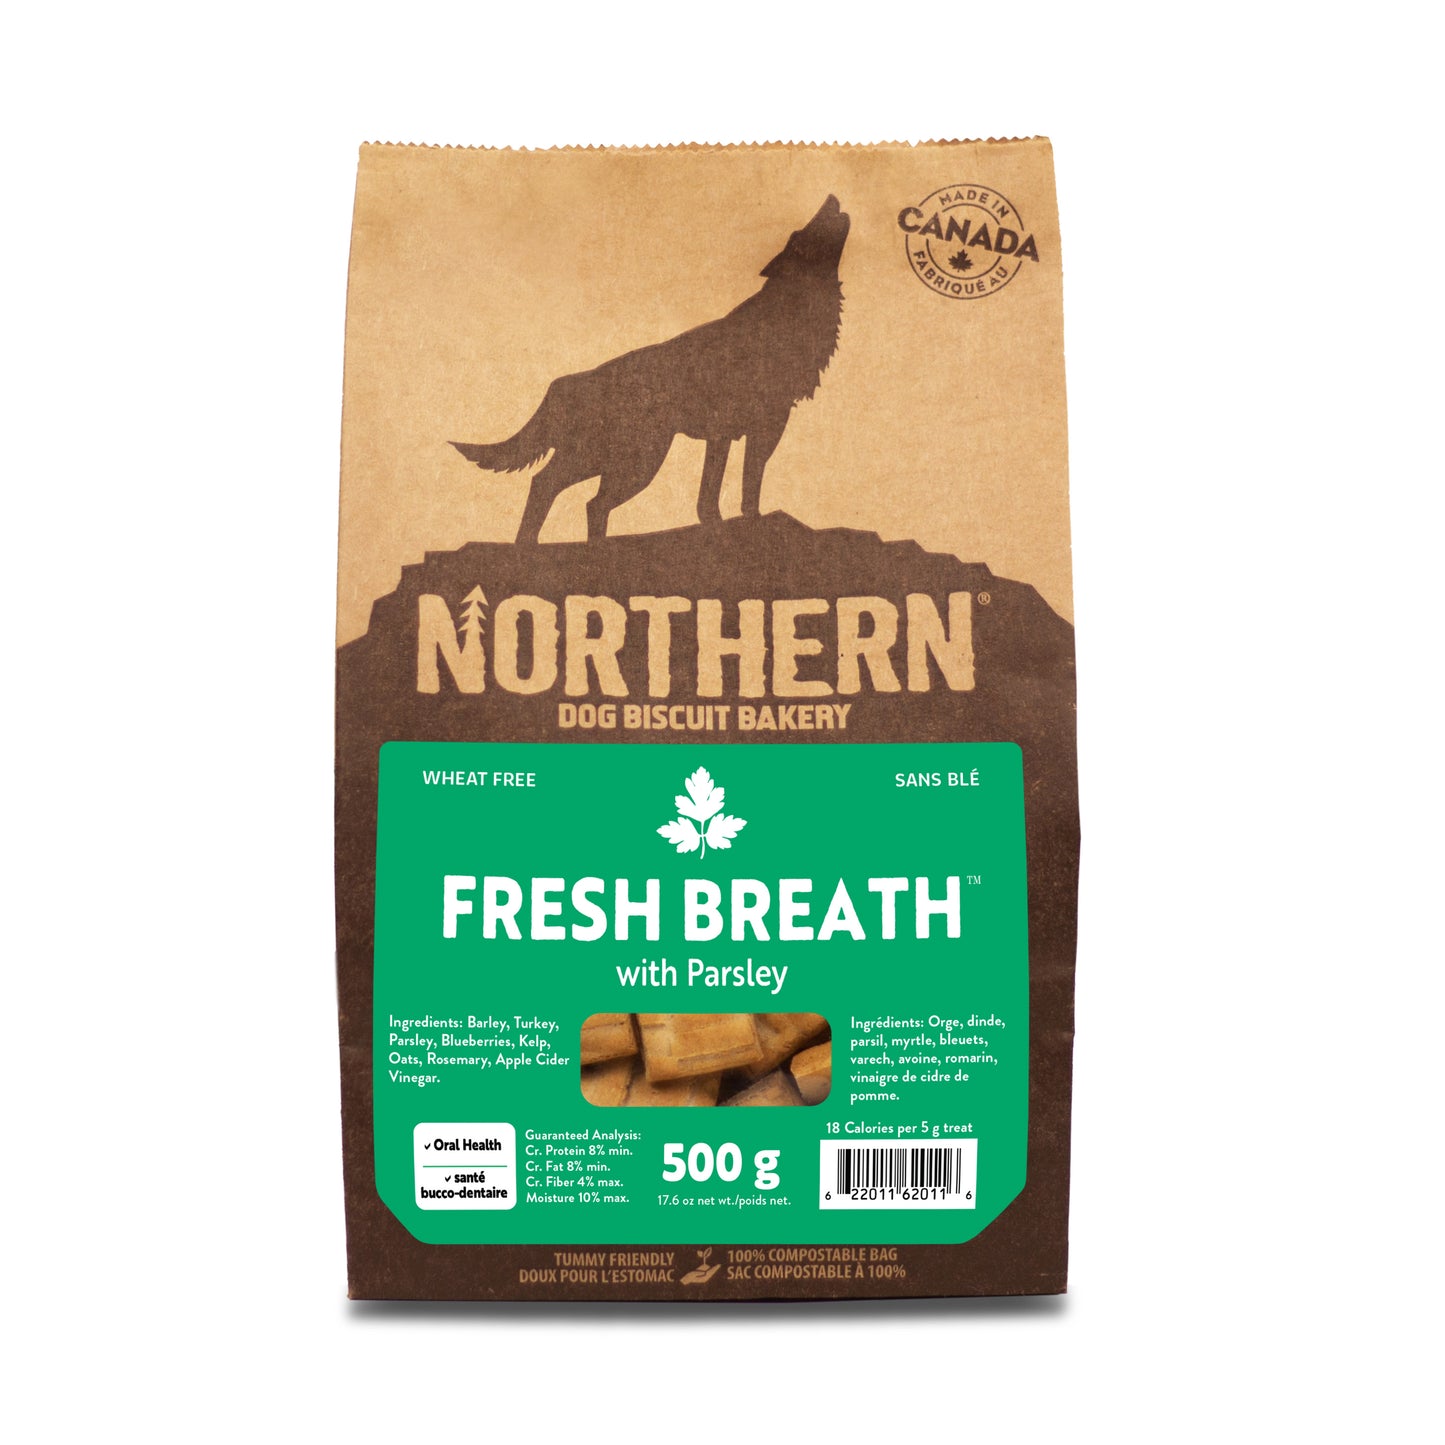 Fresh Breath dog biscuit-mint green label-product photo with front view